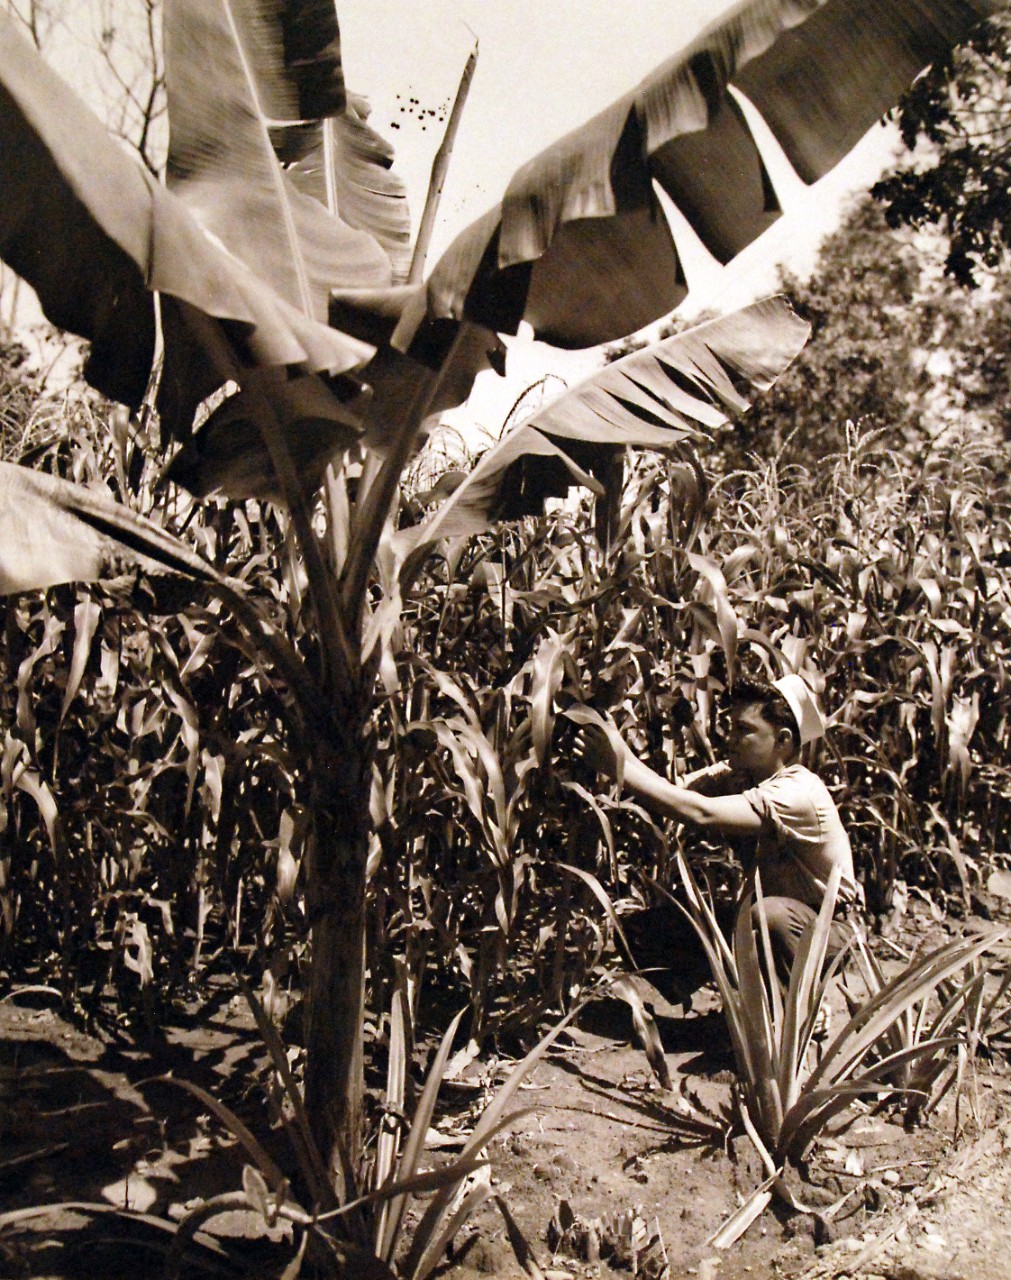 80-G-216086: Guadalcanal Island, Solomon Islands.  Corn was grown in VD-1’s Victory Garden at the instigation of its new skipper Commander John H. McElroy, USN.  Banana and pineapple plants form a border around the plot.    Photograph released February 12, 1944.  U.S. Navy Photograph, now in the collections of the National Archives.  (2016/11/25).